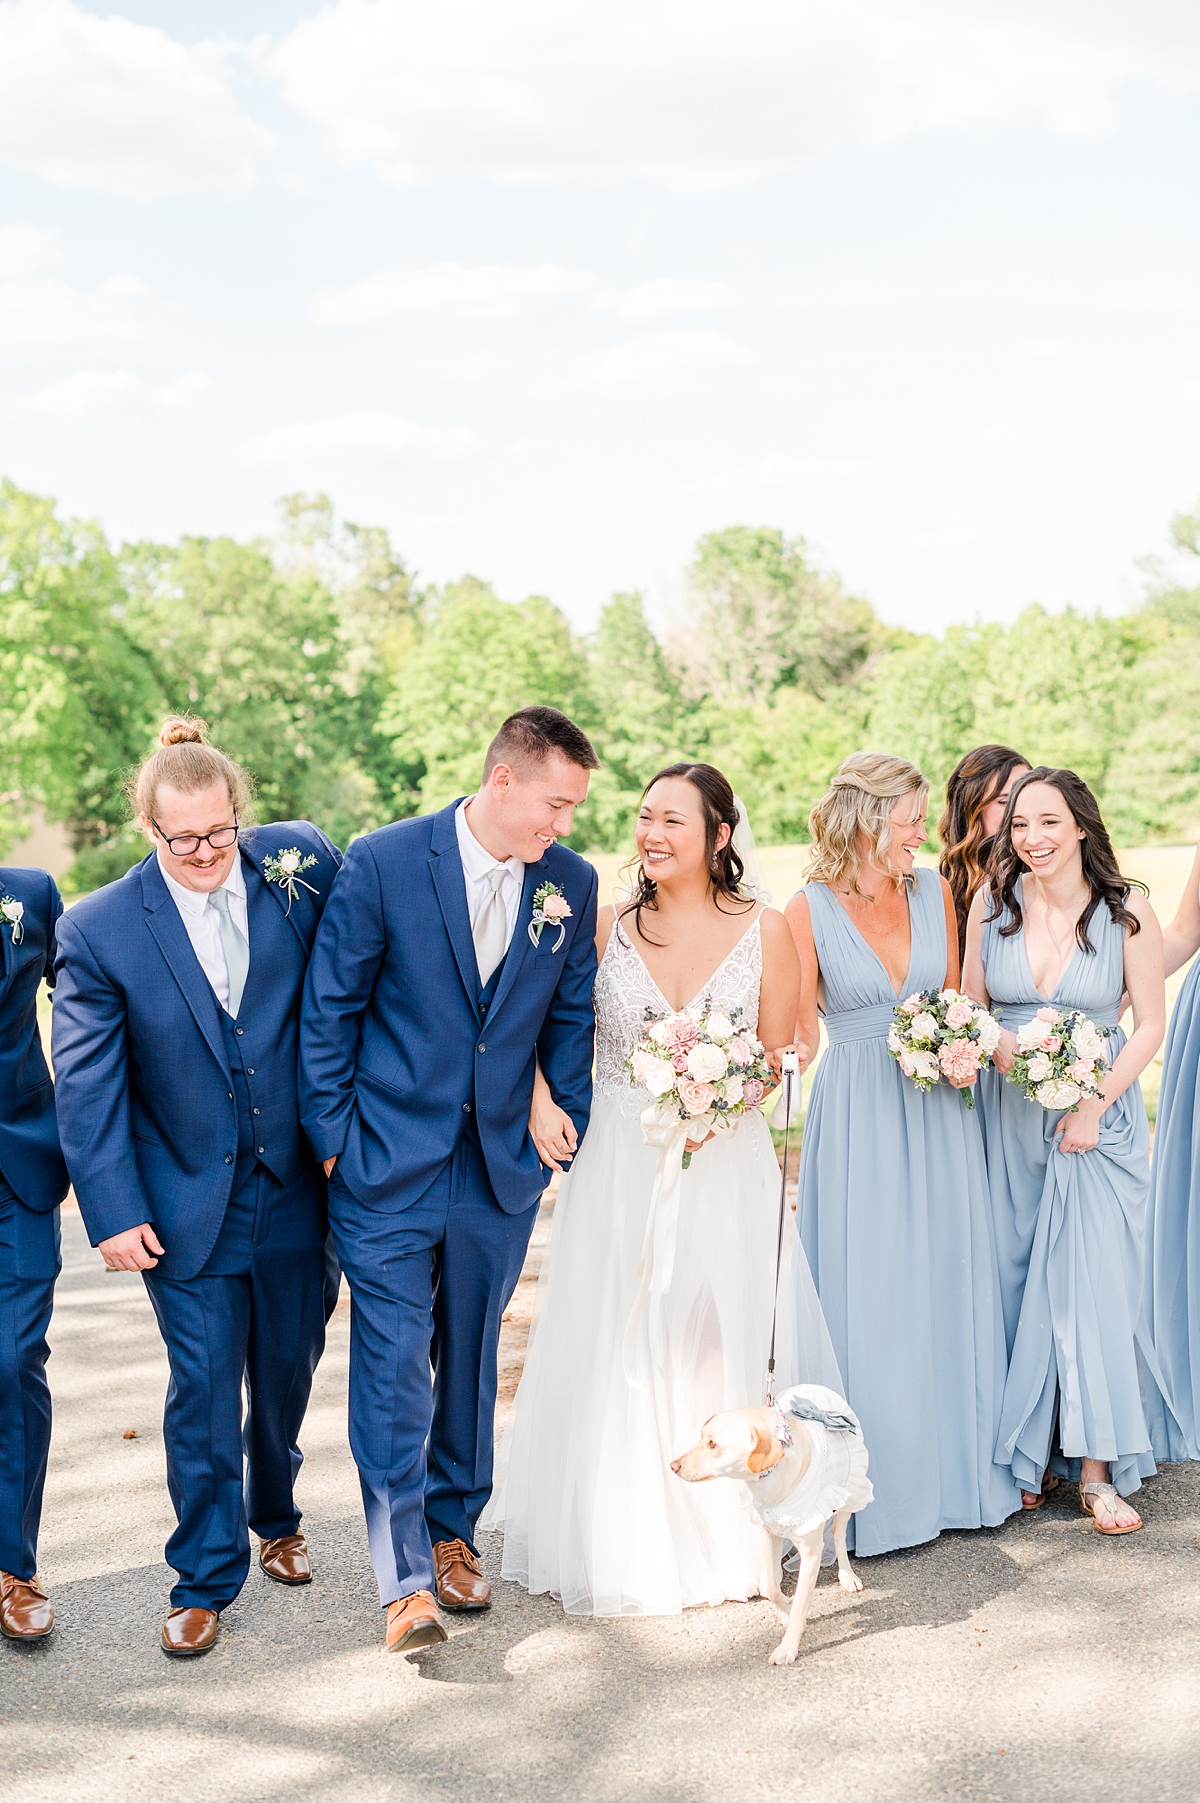 Bridal party portraits with dog flower girl at Hanover Golf Club spring wedding. Photography by Virginia Wedding Photographer Kailey Brianne Photography. 